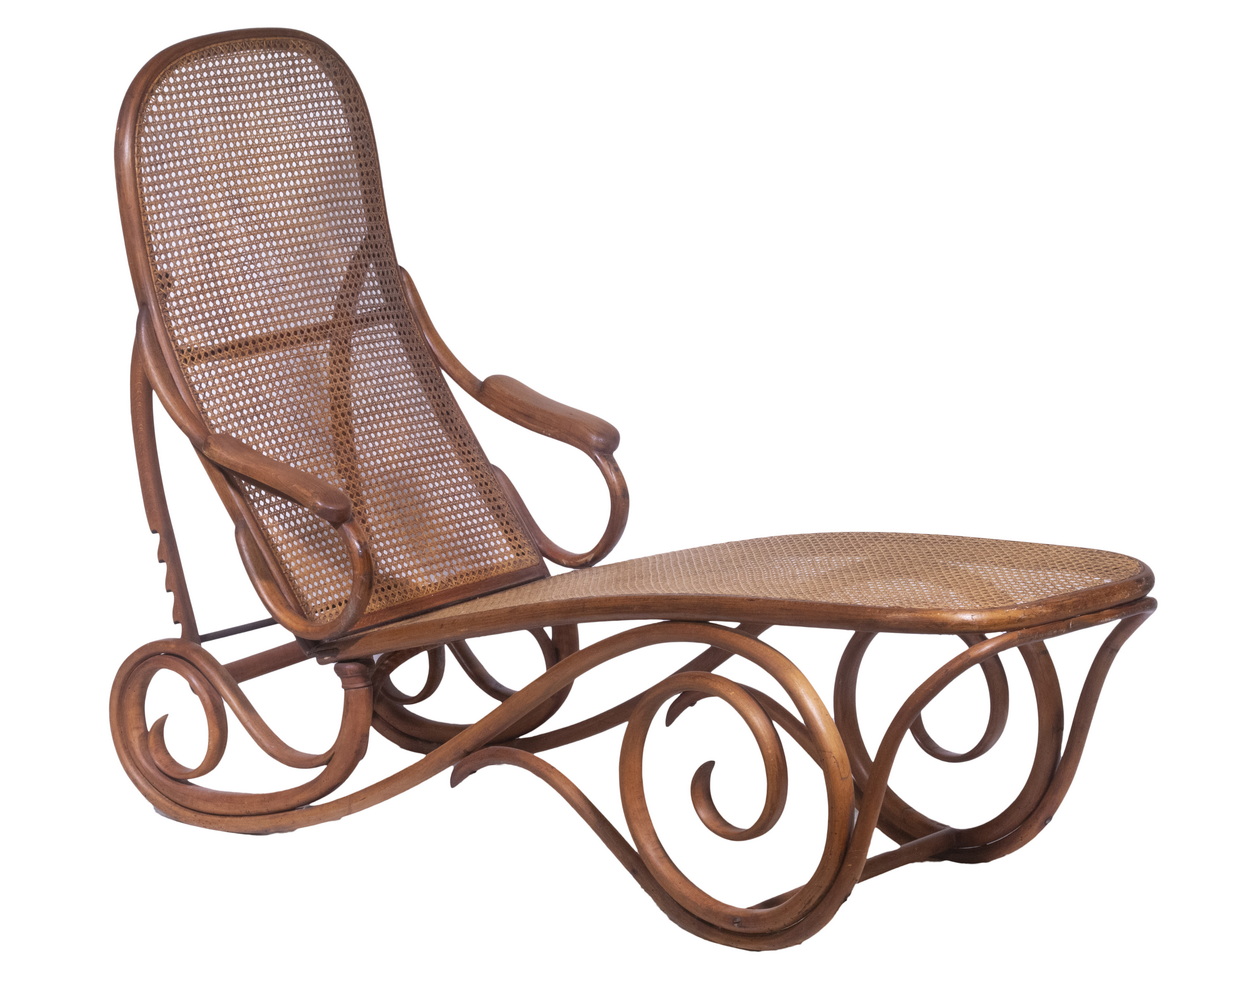 THONET BENTWOOD CHAISE LOUNGE Circa 302be2